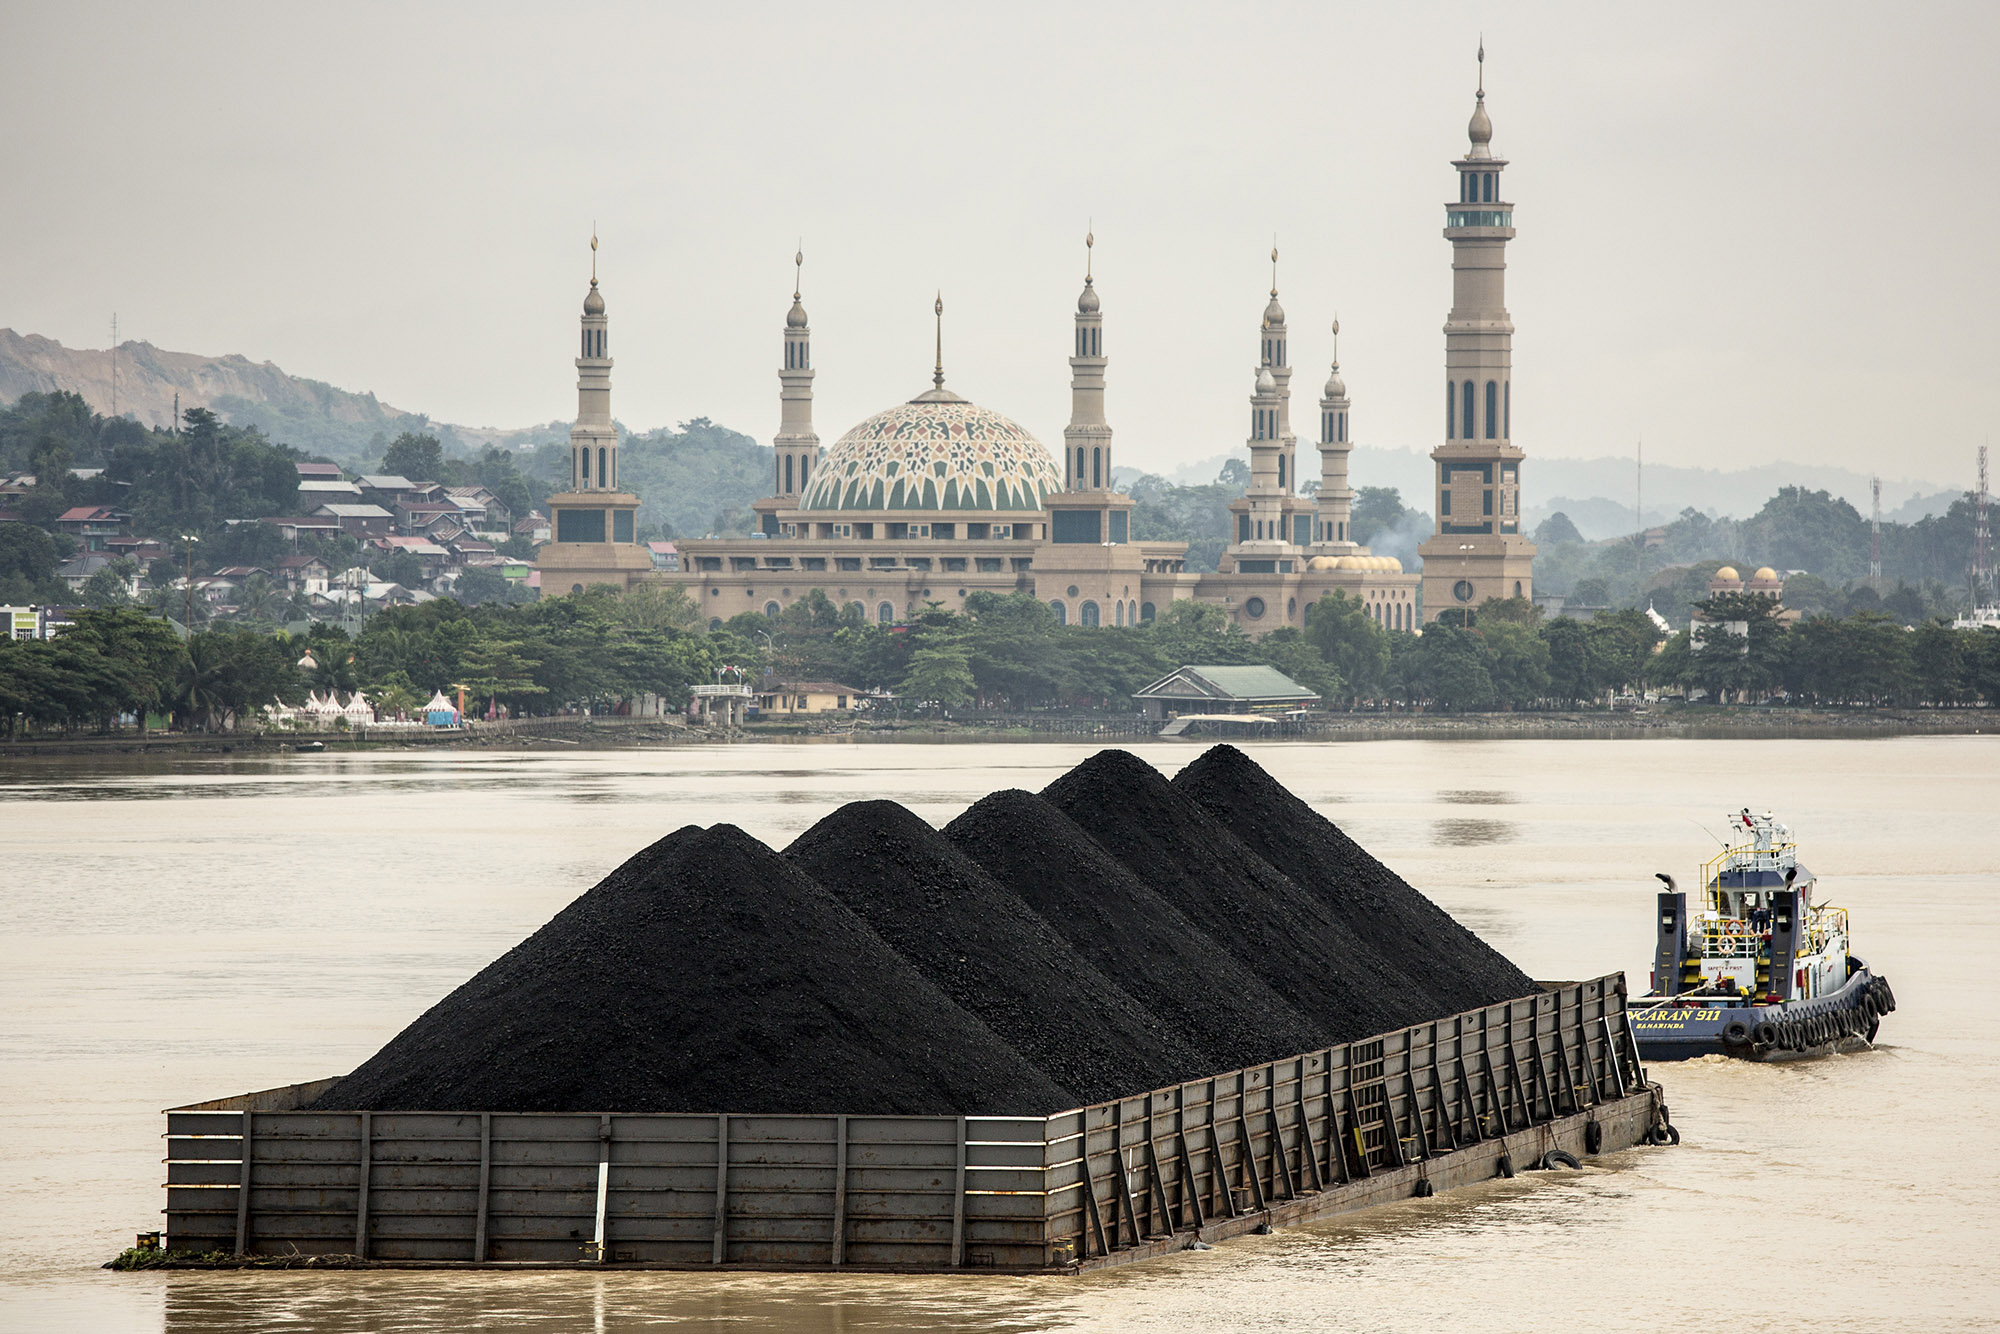 Coal is critical to Indonesia’s energy needs and exports. Yet it needs to be phased out.